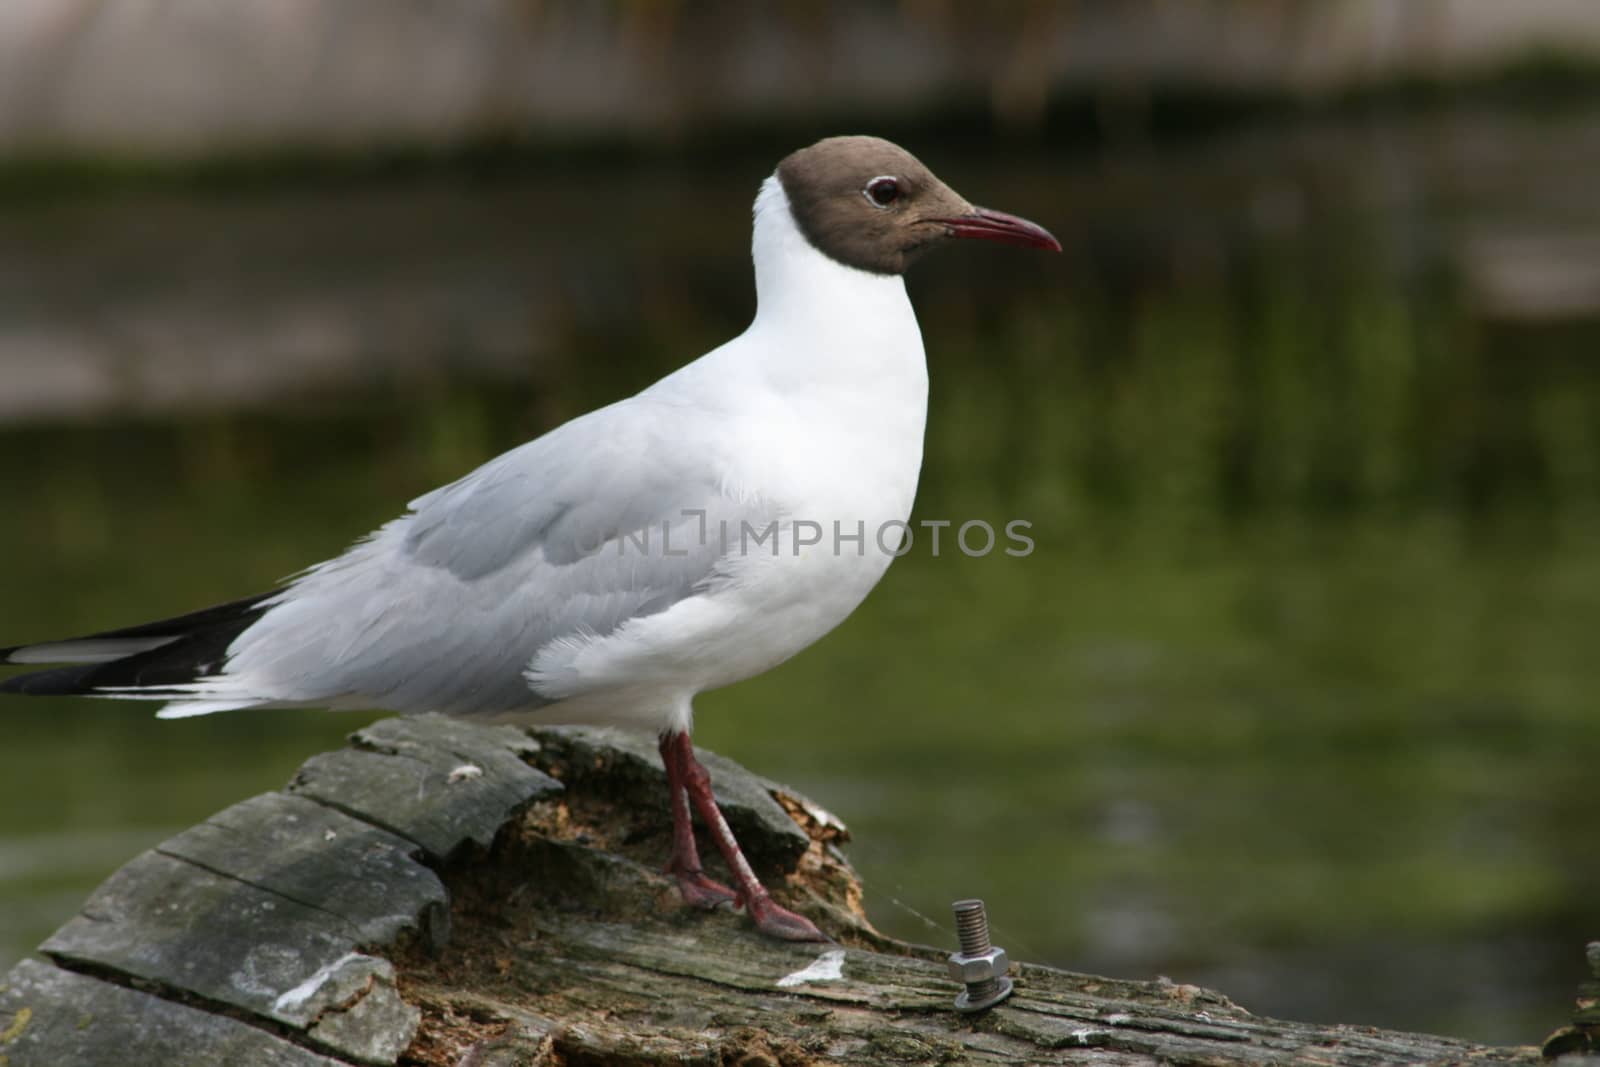 Black-headed gull sitting on a piece of wood in the water